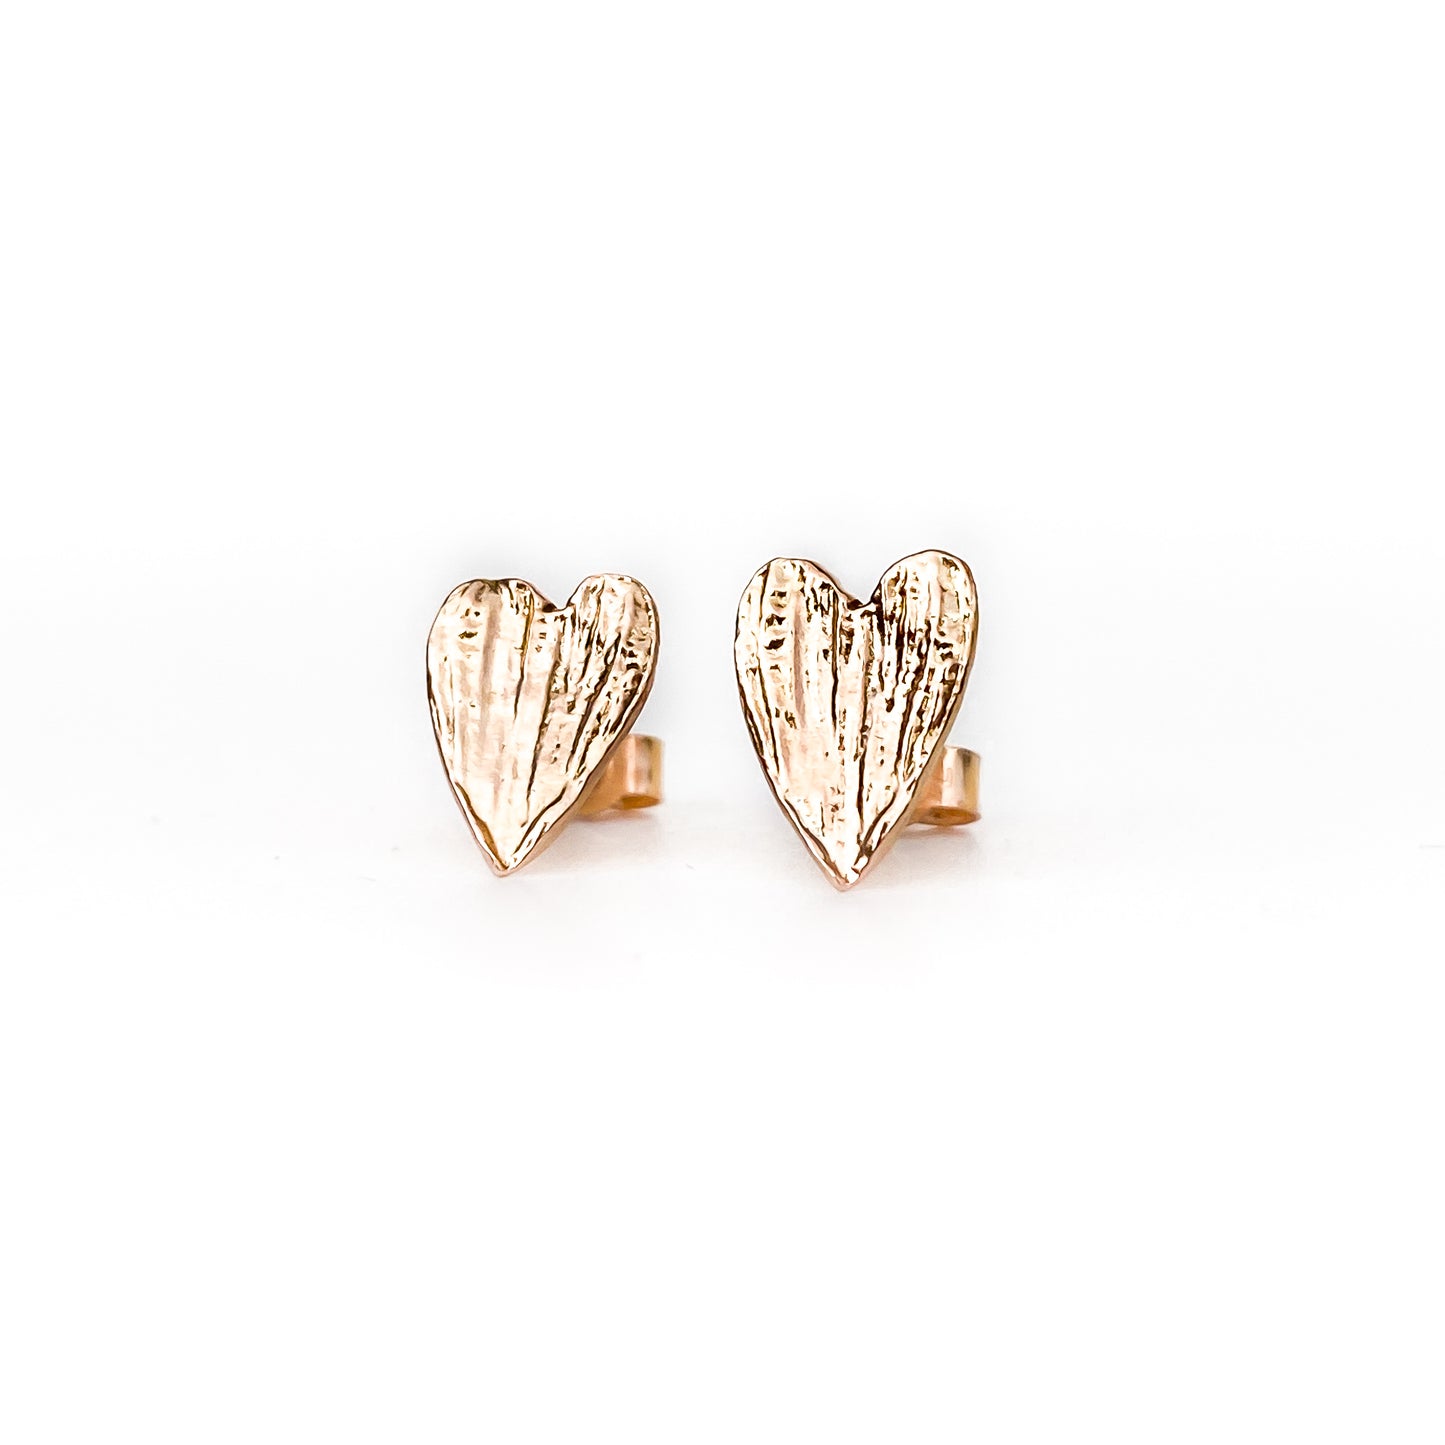 Gold Snowdrop Petal 'Heart' Earrings - Yellow, Rose or White Gold